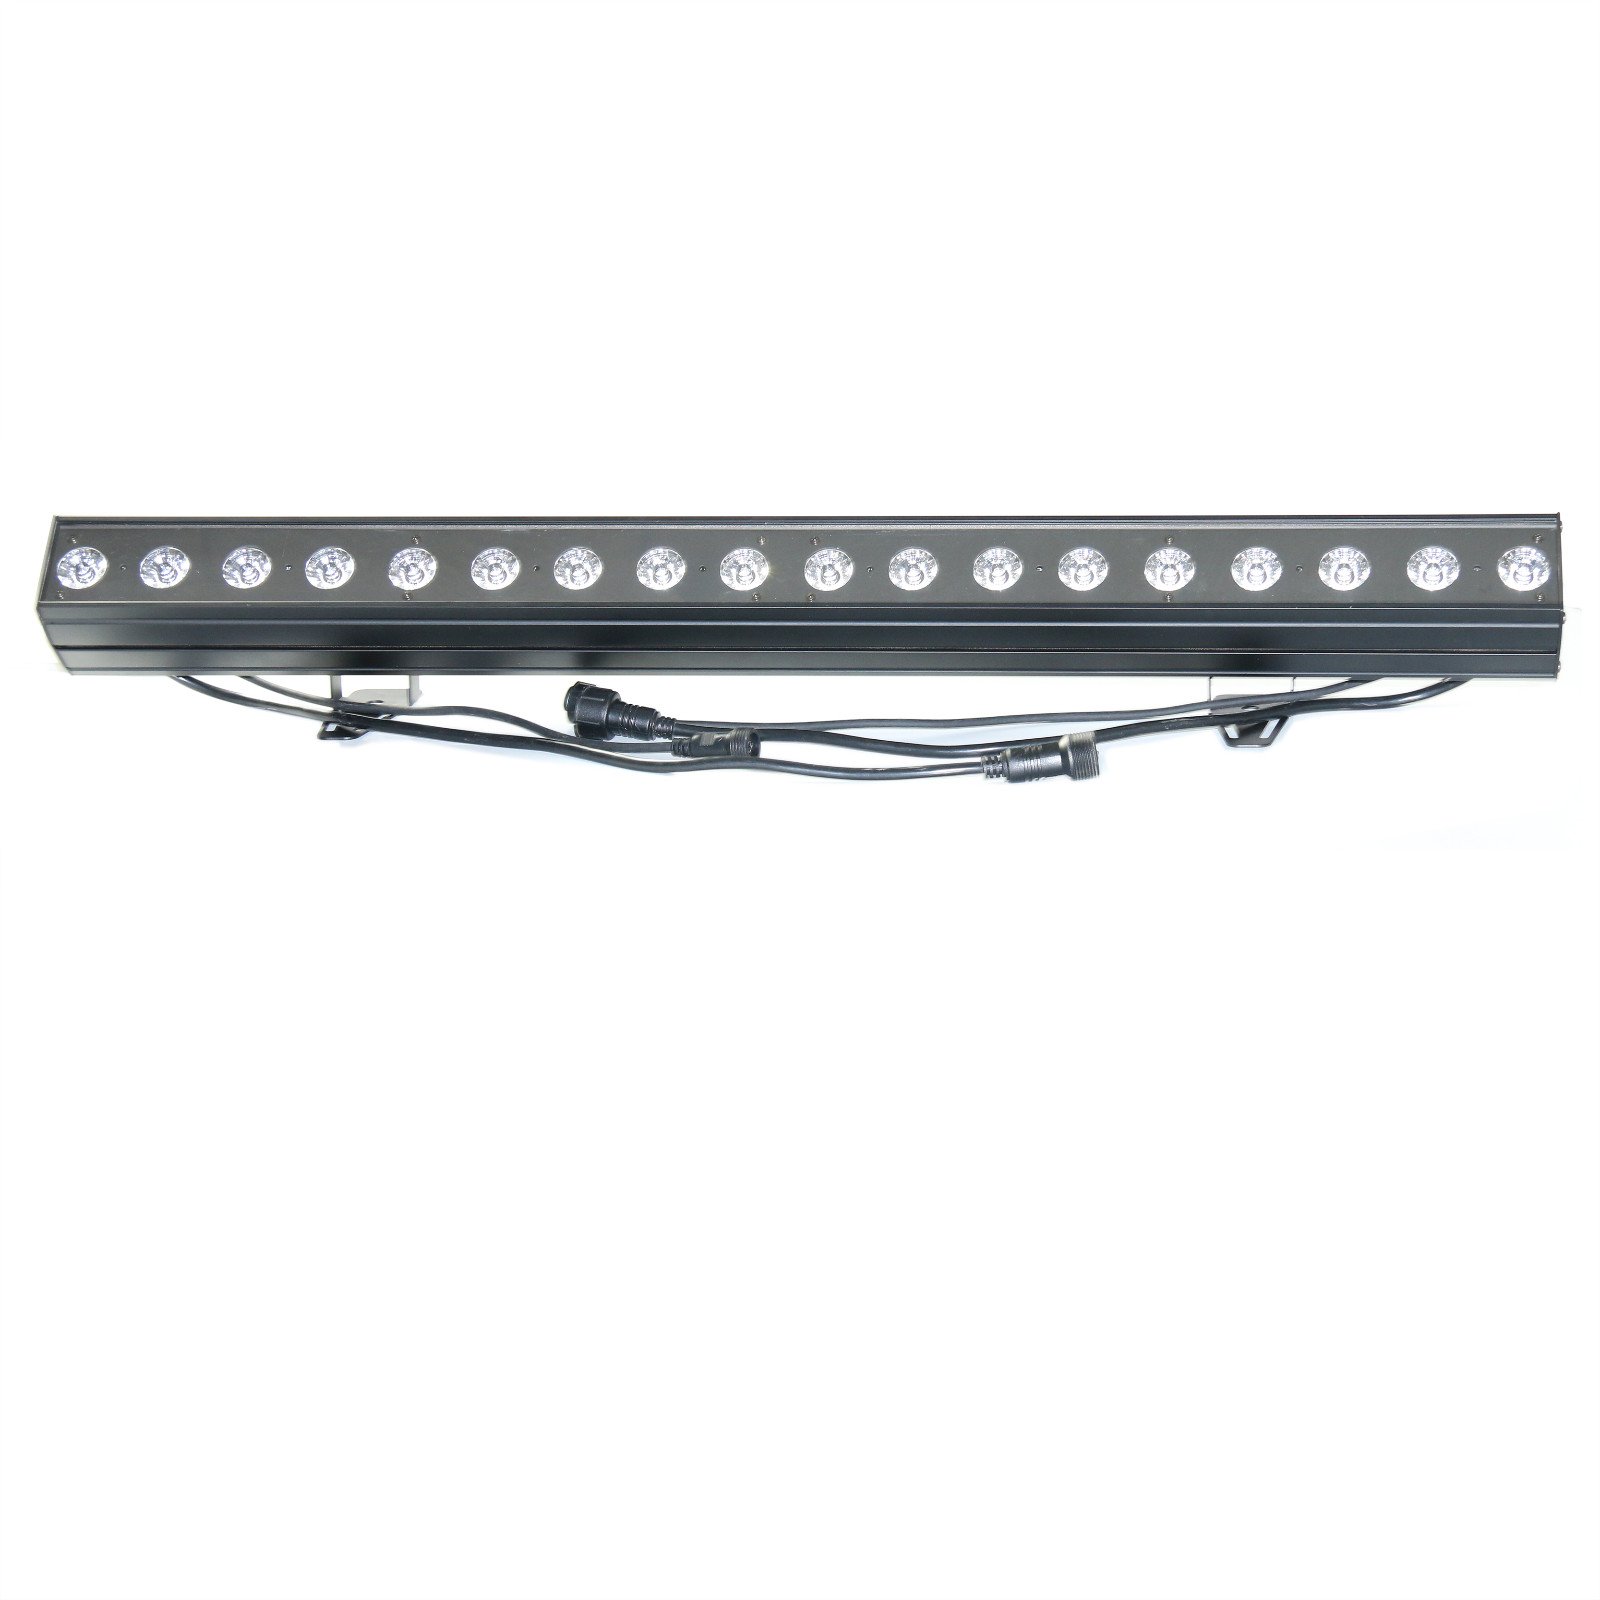 Individually Control 3IN1 LED Wall Washer Bar Light MS-1810-5